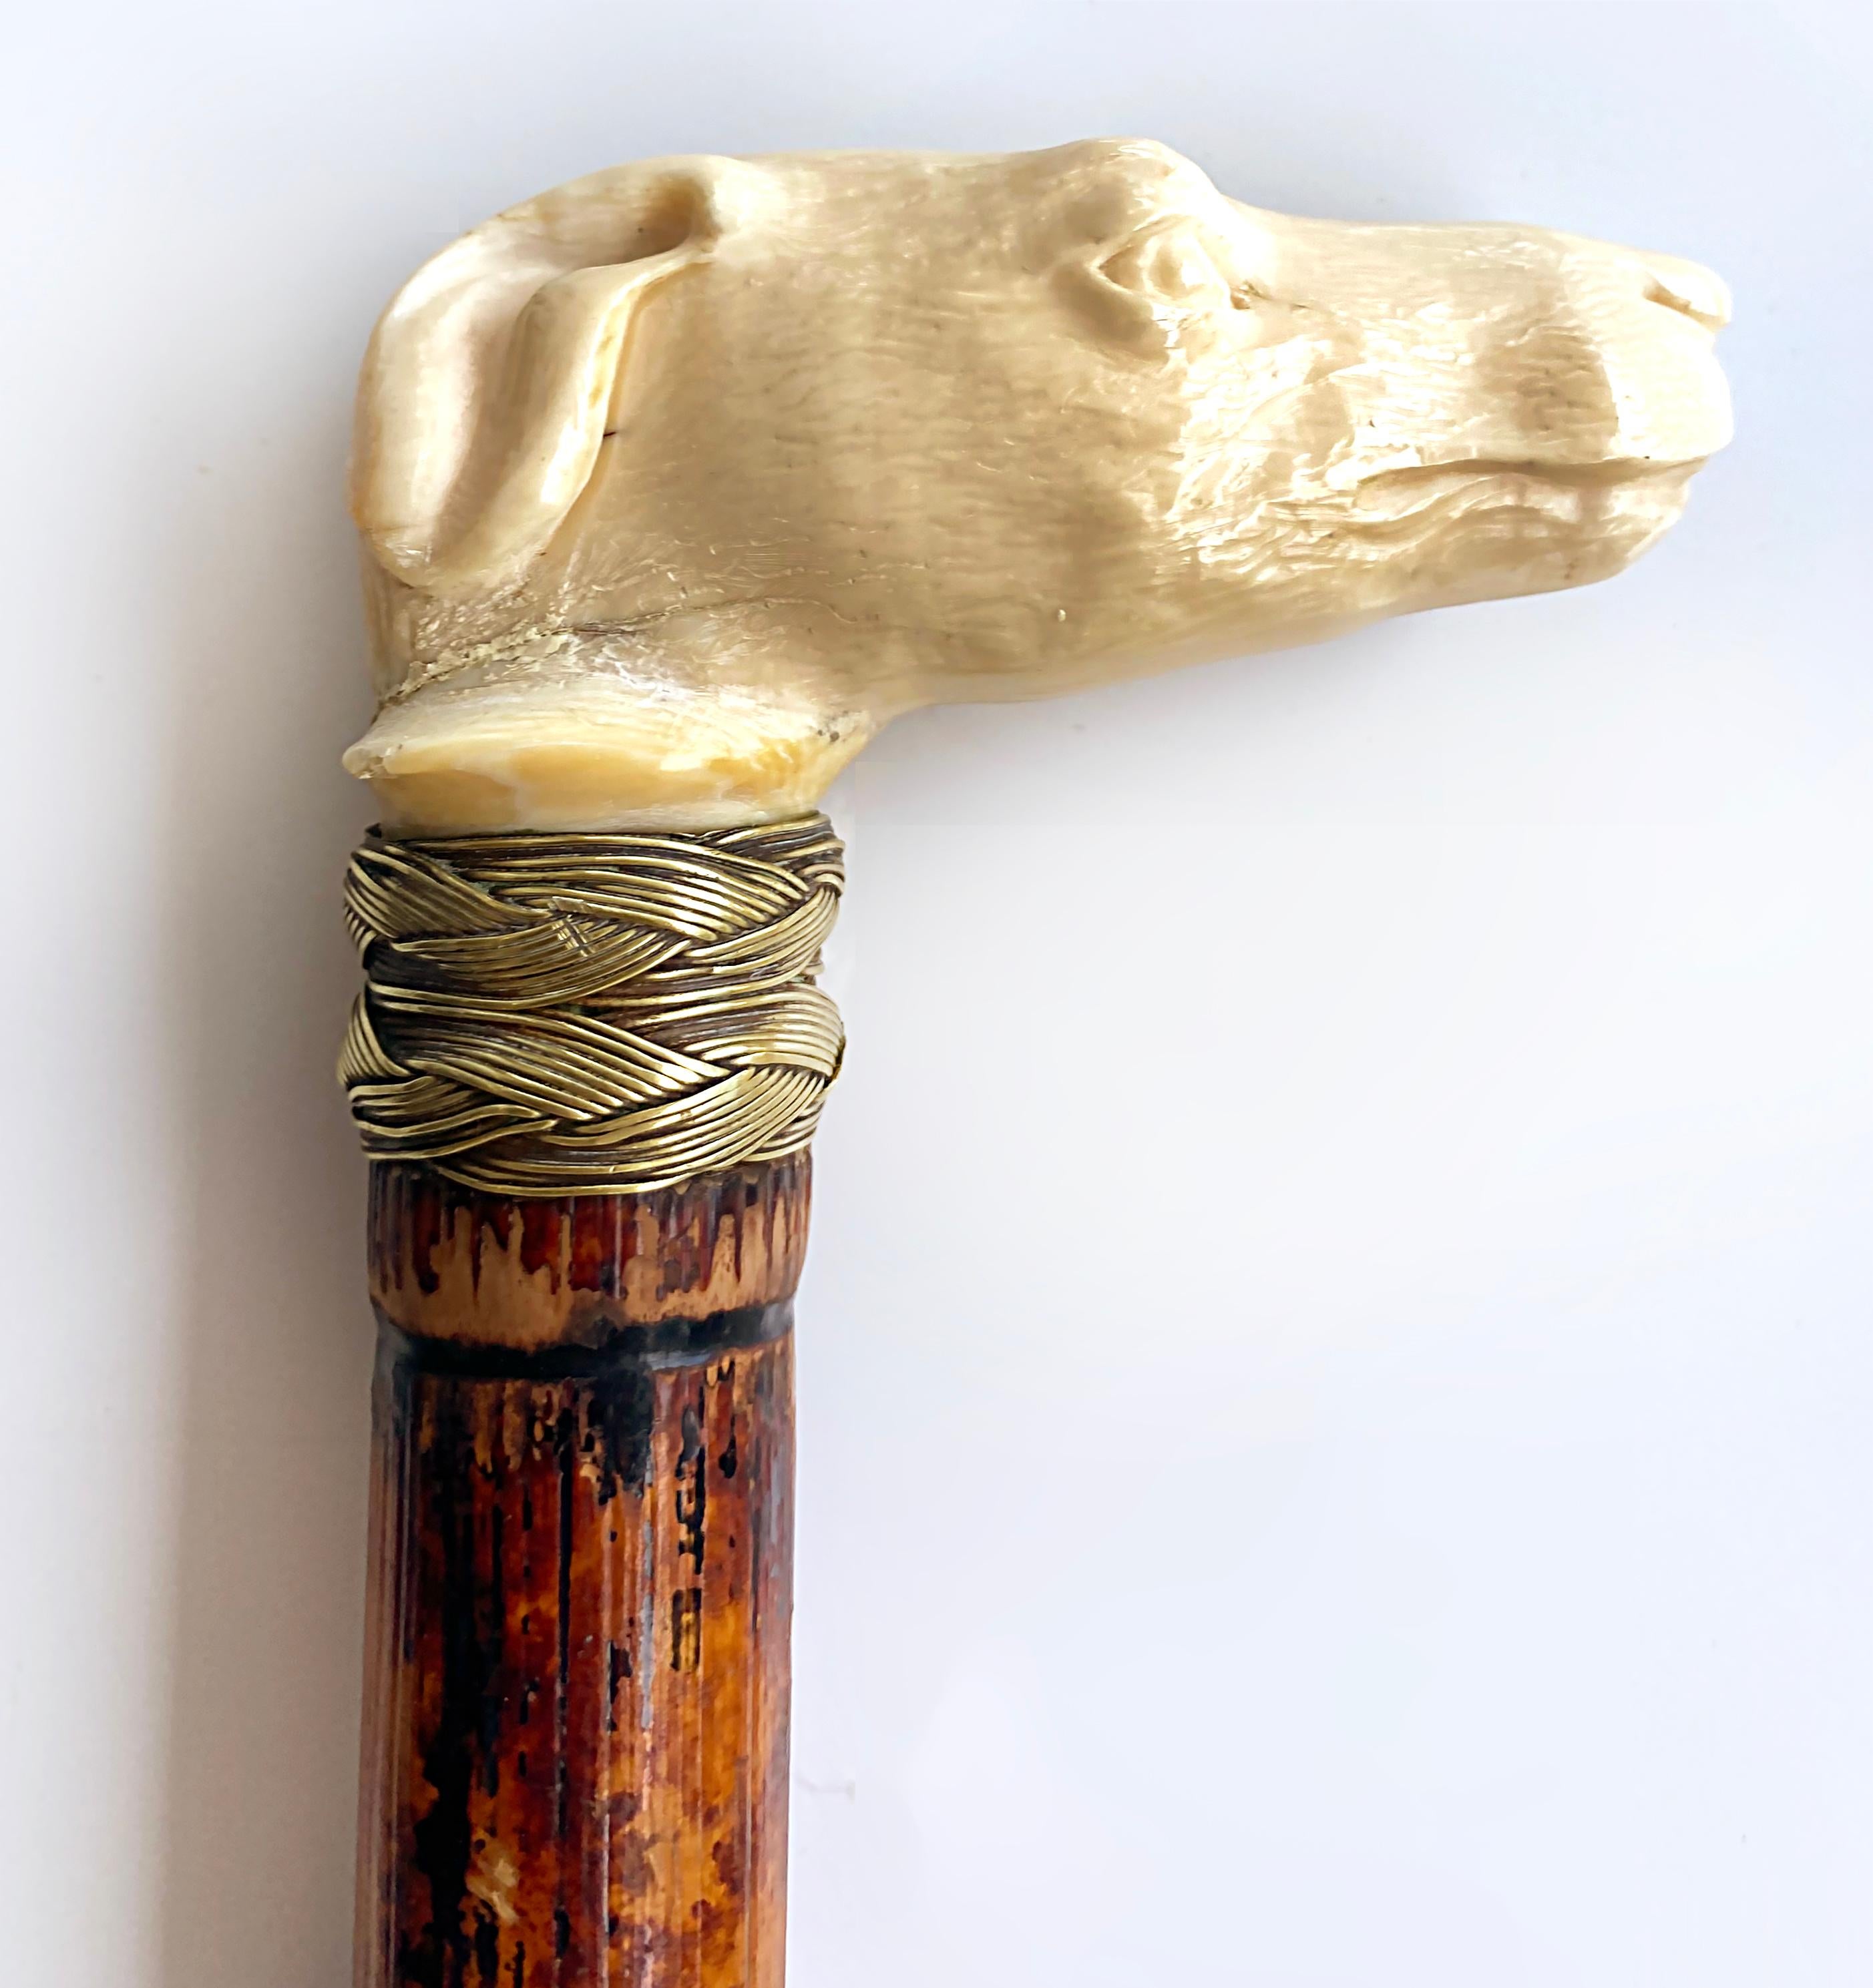 Antique Carved Bone Greyhound Dog Bamboo Walking Stick with Braided Banding

Offered for sale is an antique late 19th-century hand-carved greyhound head handled walking stick with braided brass metal banding. The cane shaft is a burned-finished